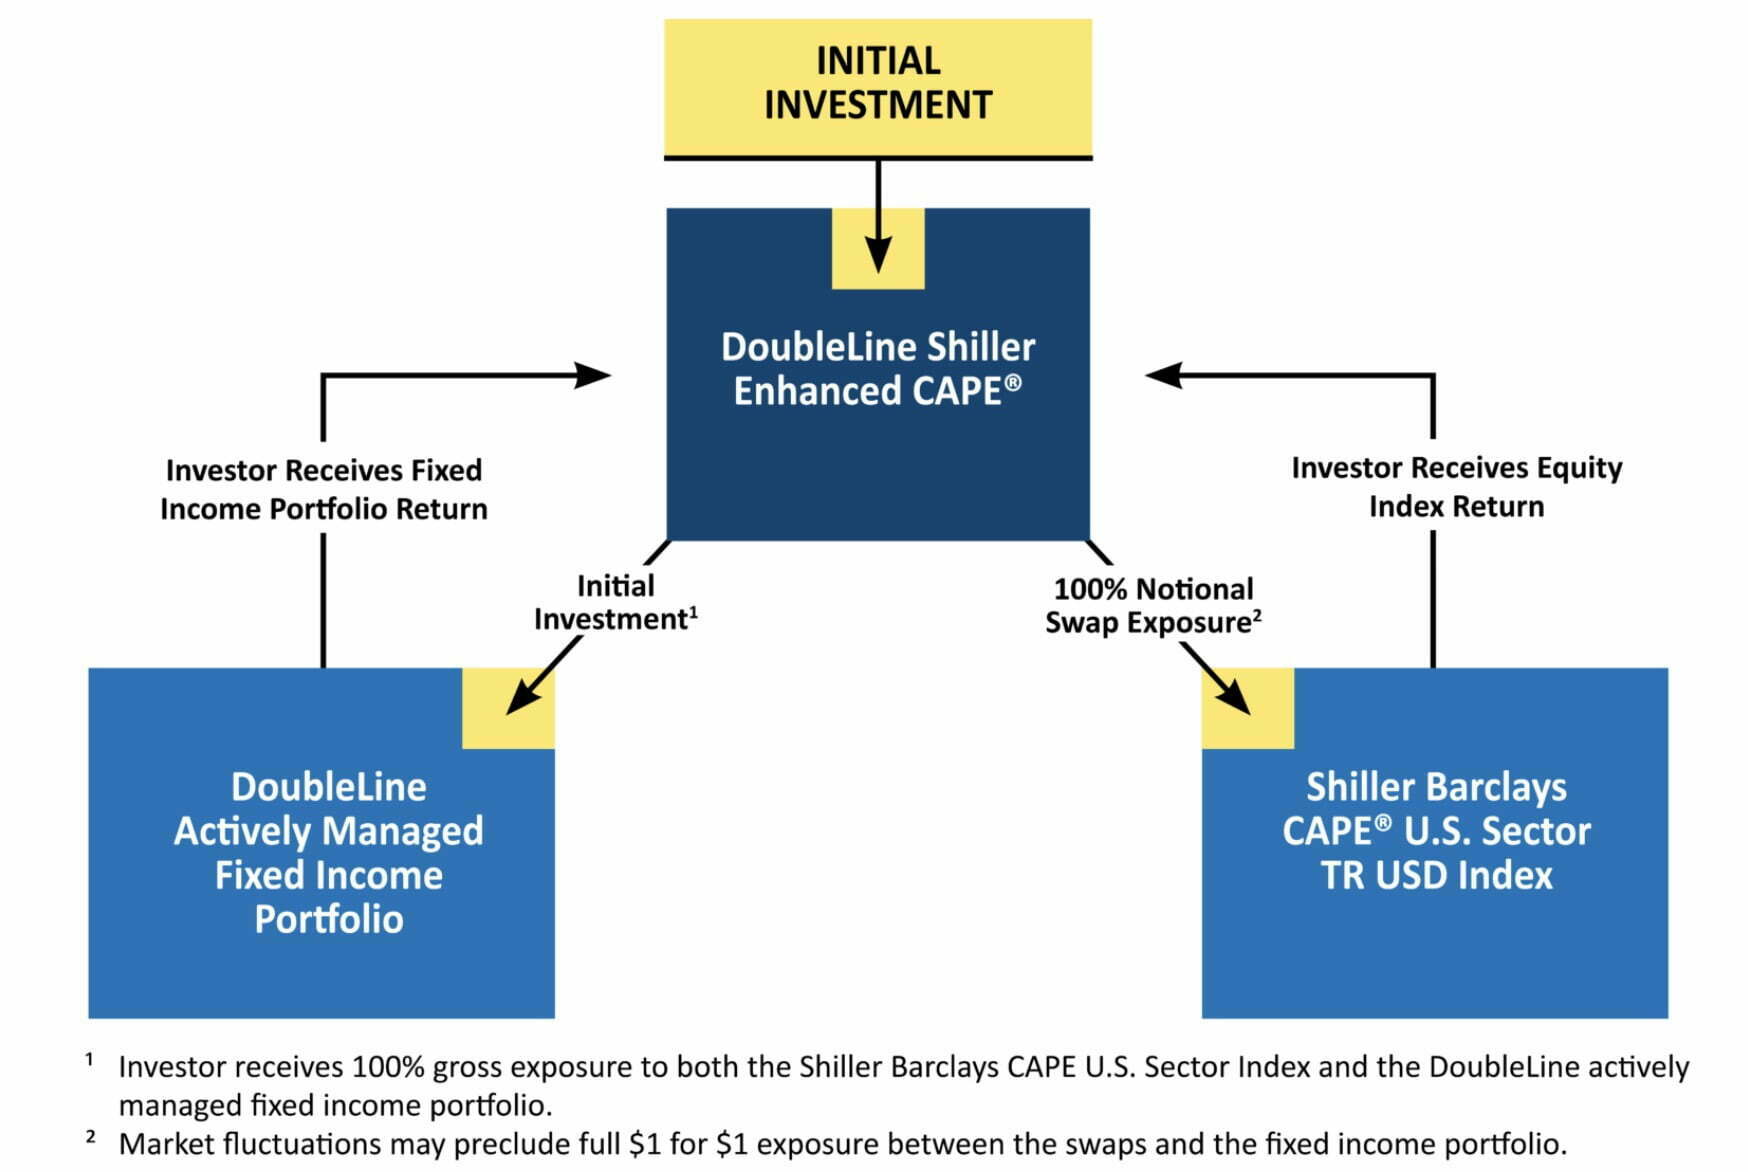 DoubleLine Shiller Enhanced CAPE with 100% exposure to DoubeLine Actively Managed Fixed Income Portfolio and 100% exposure to Shiller Barclays CAPE US Sector Index 